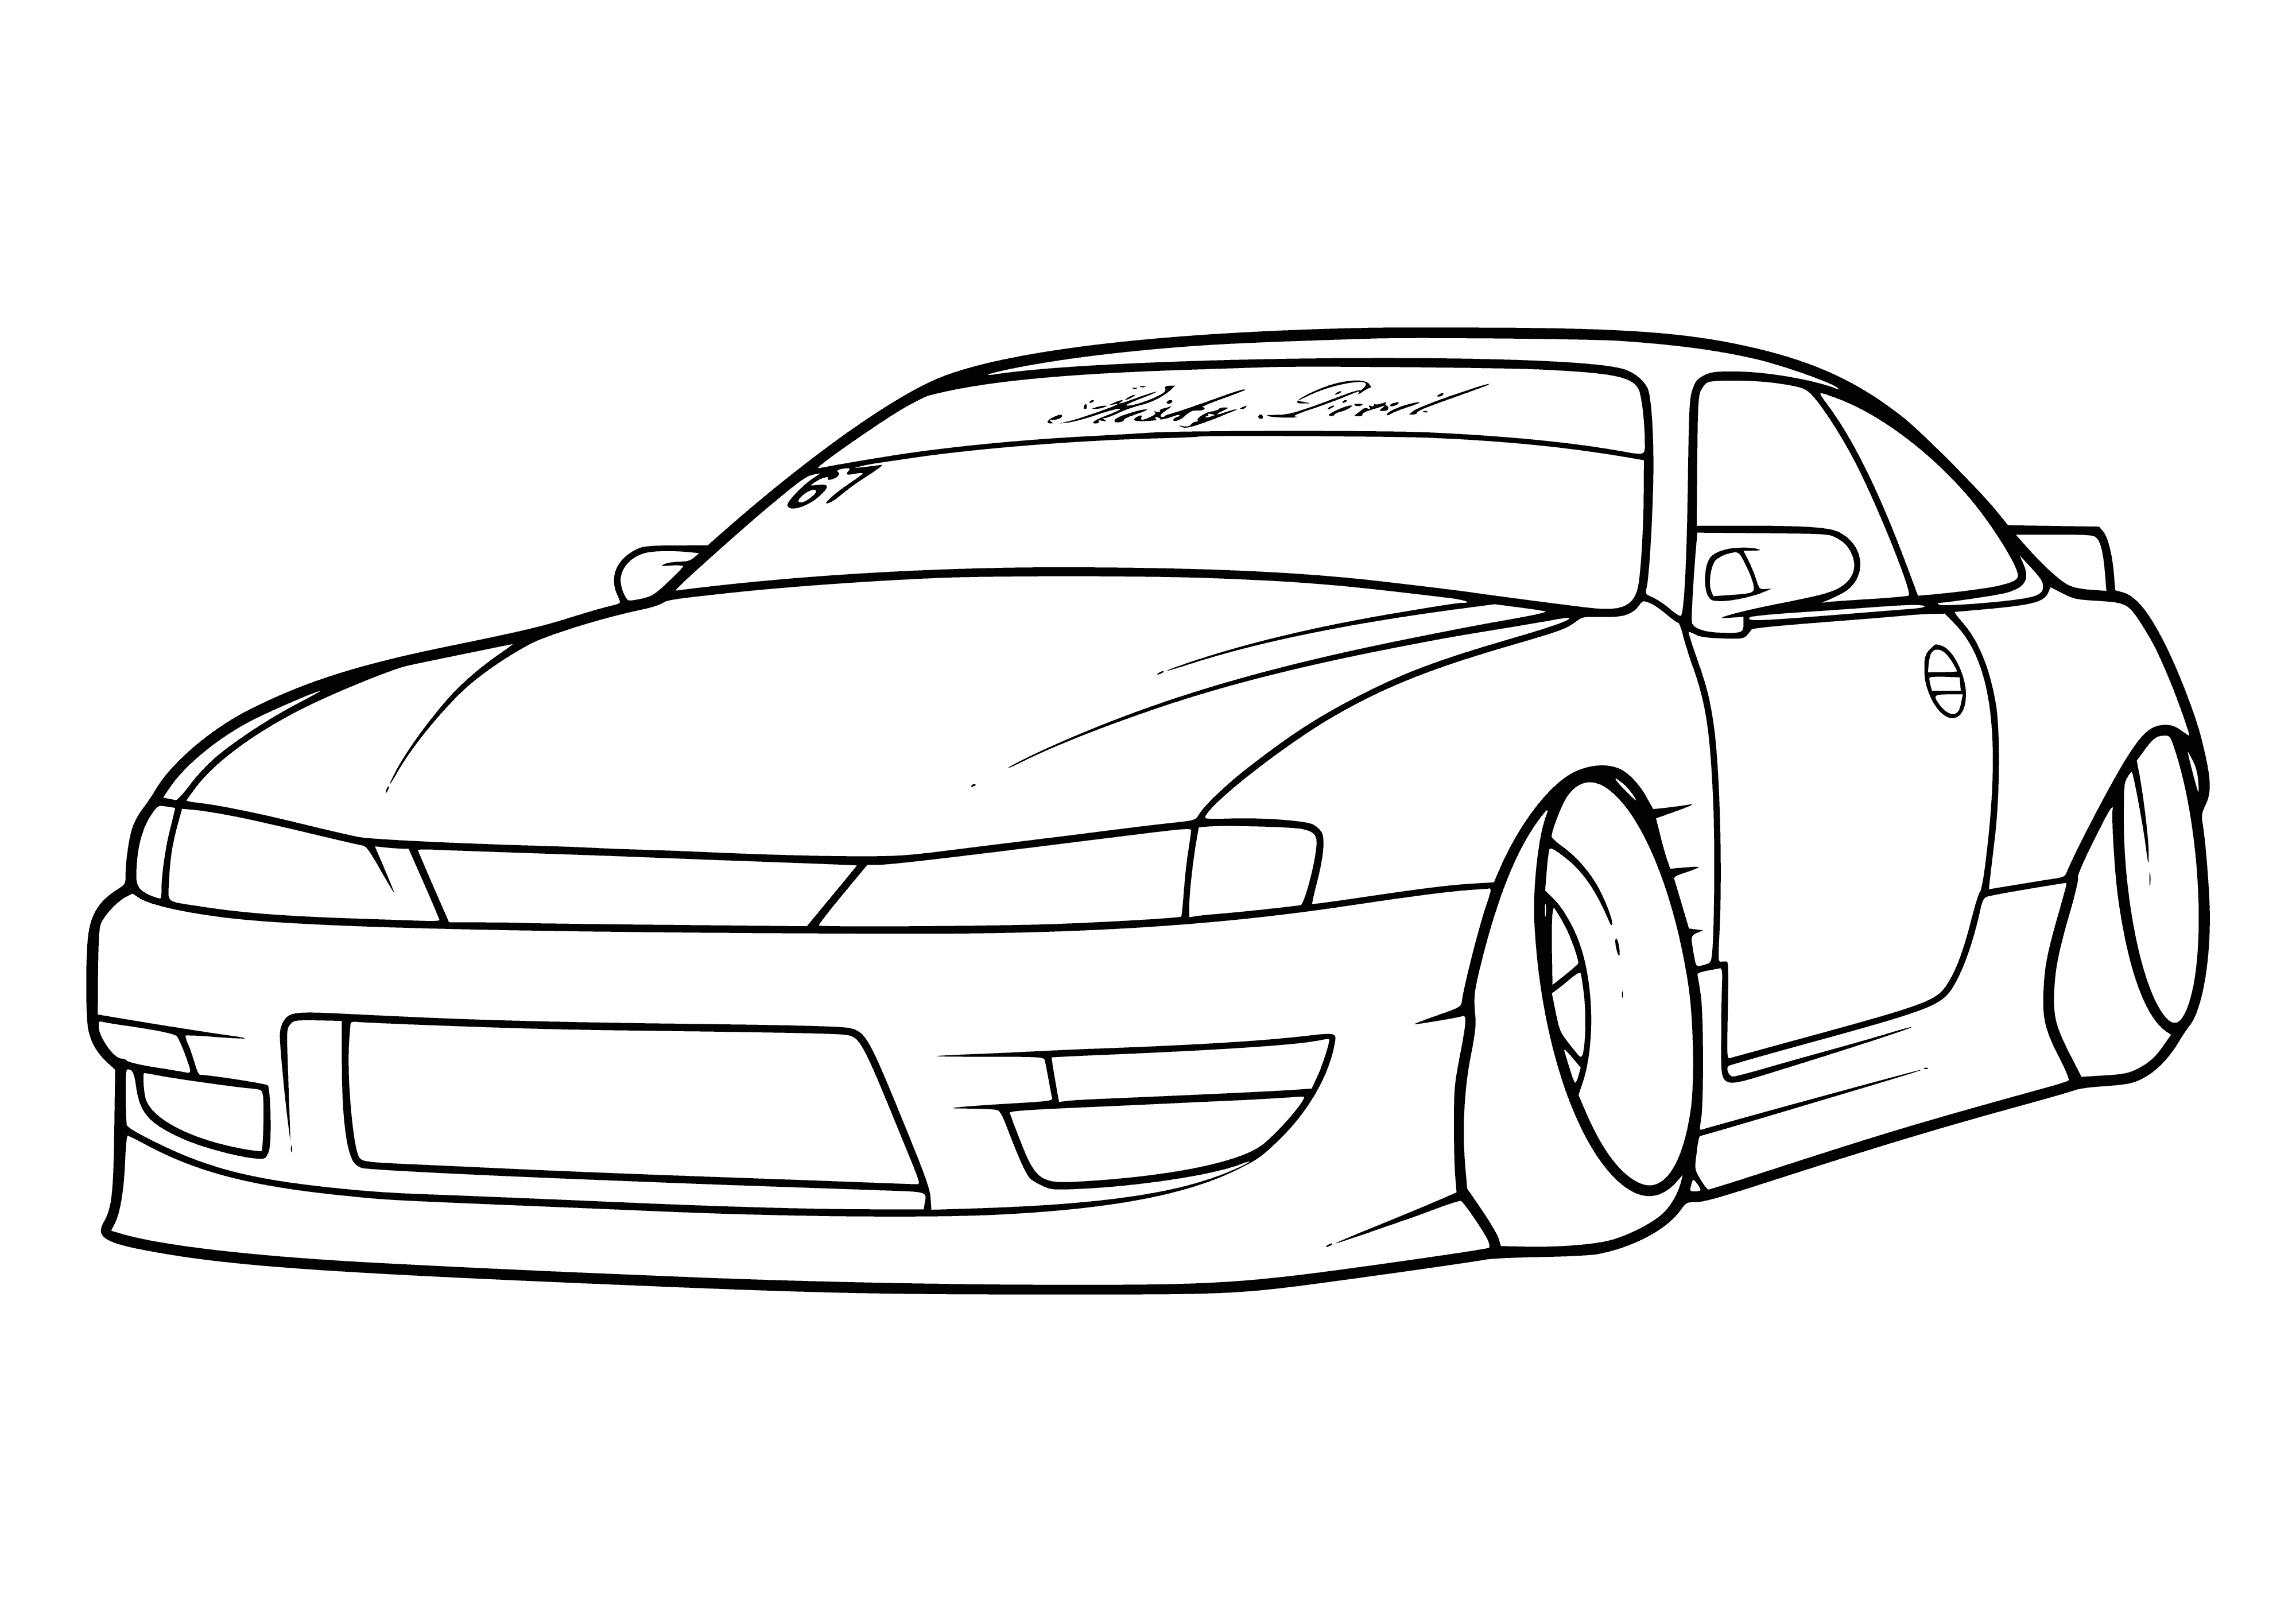 coloring page: Light blue car on city street: 4 doors, silver trunk, windows tinted.